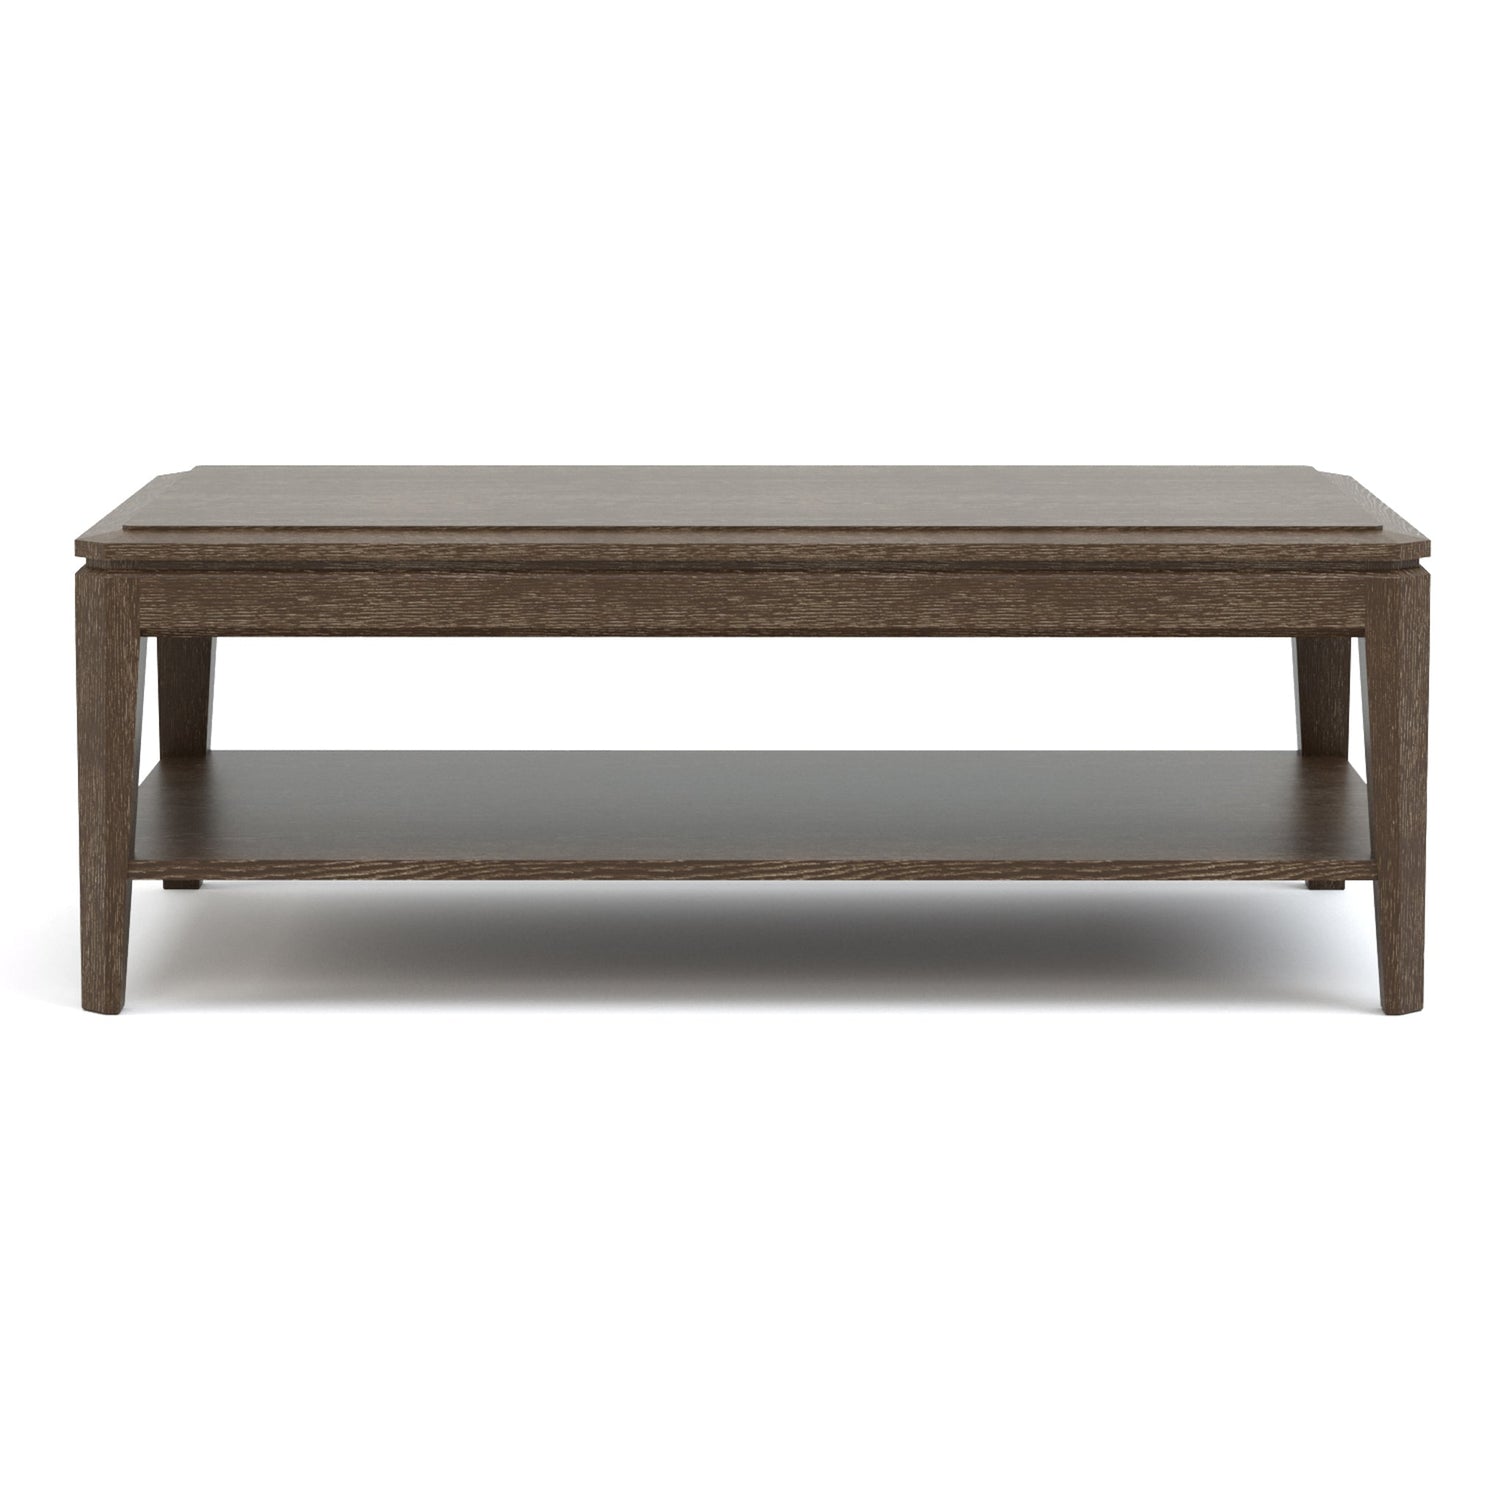 Maidstone Rectangular Cocktail Table in 202 Pier finish